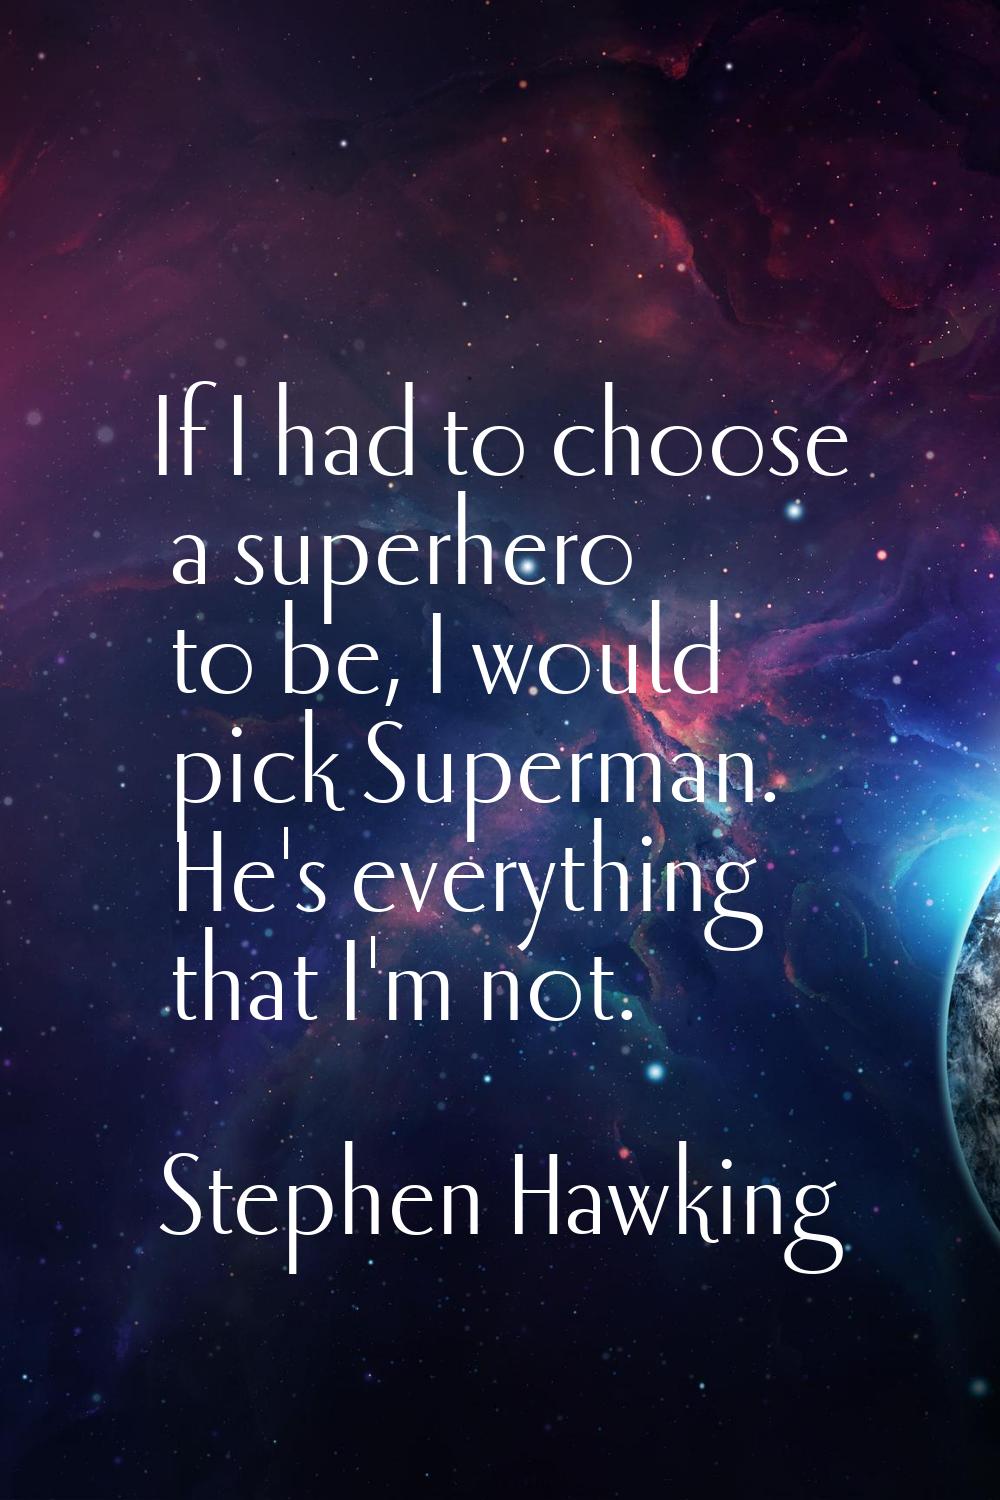 If I had to choose a superhero to be, I would pick Superman. He's everything that I'm not.